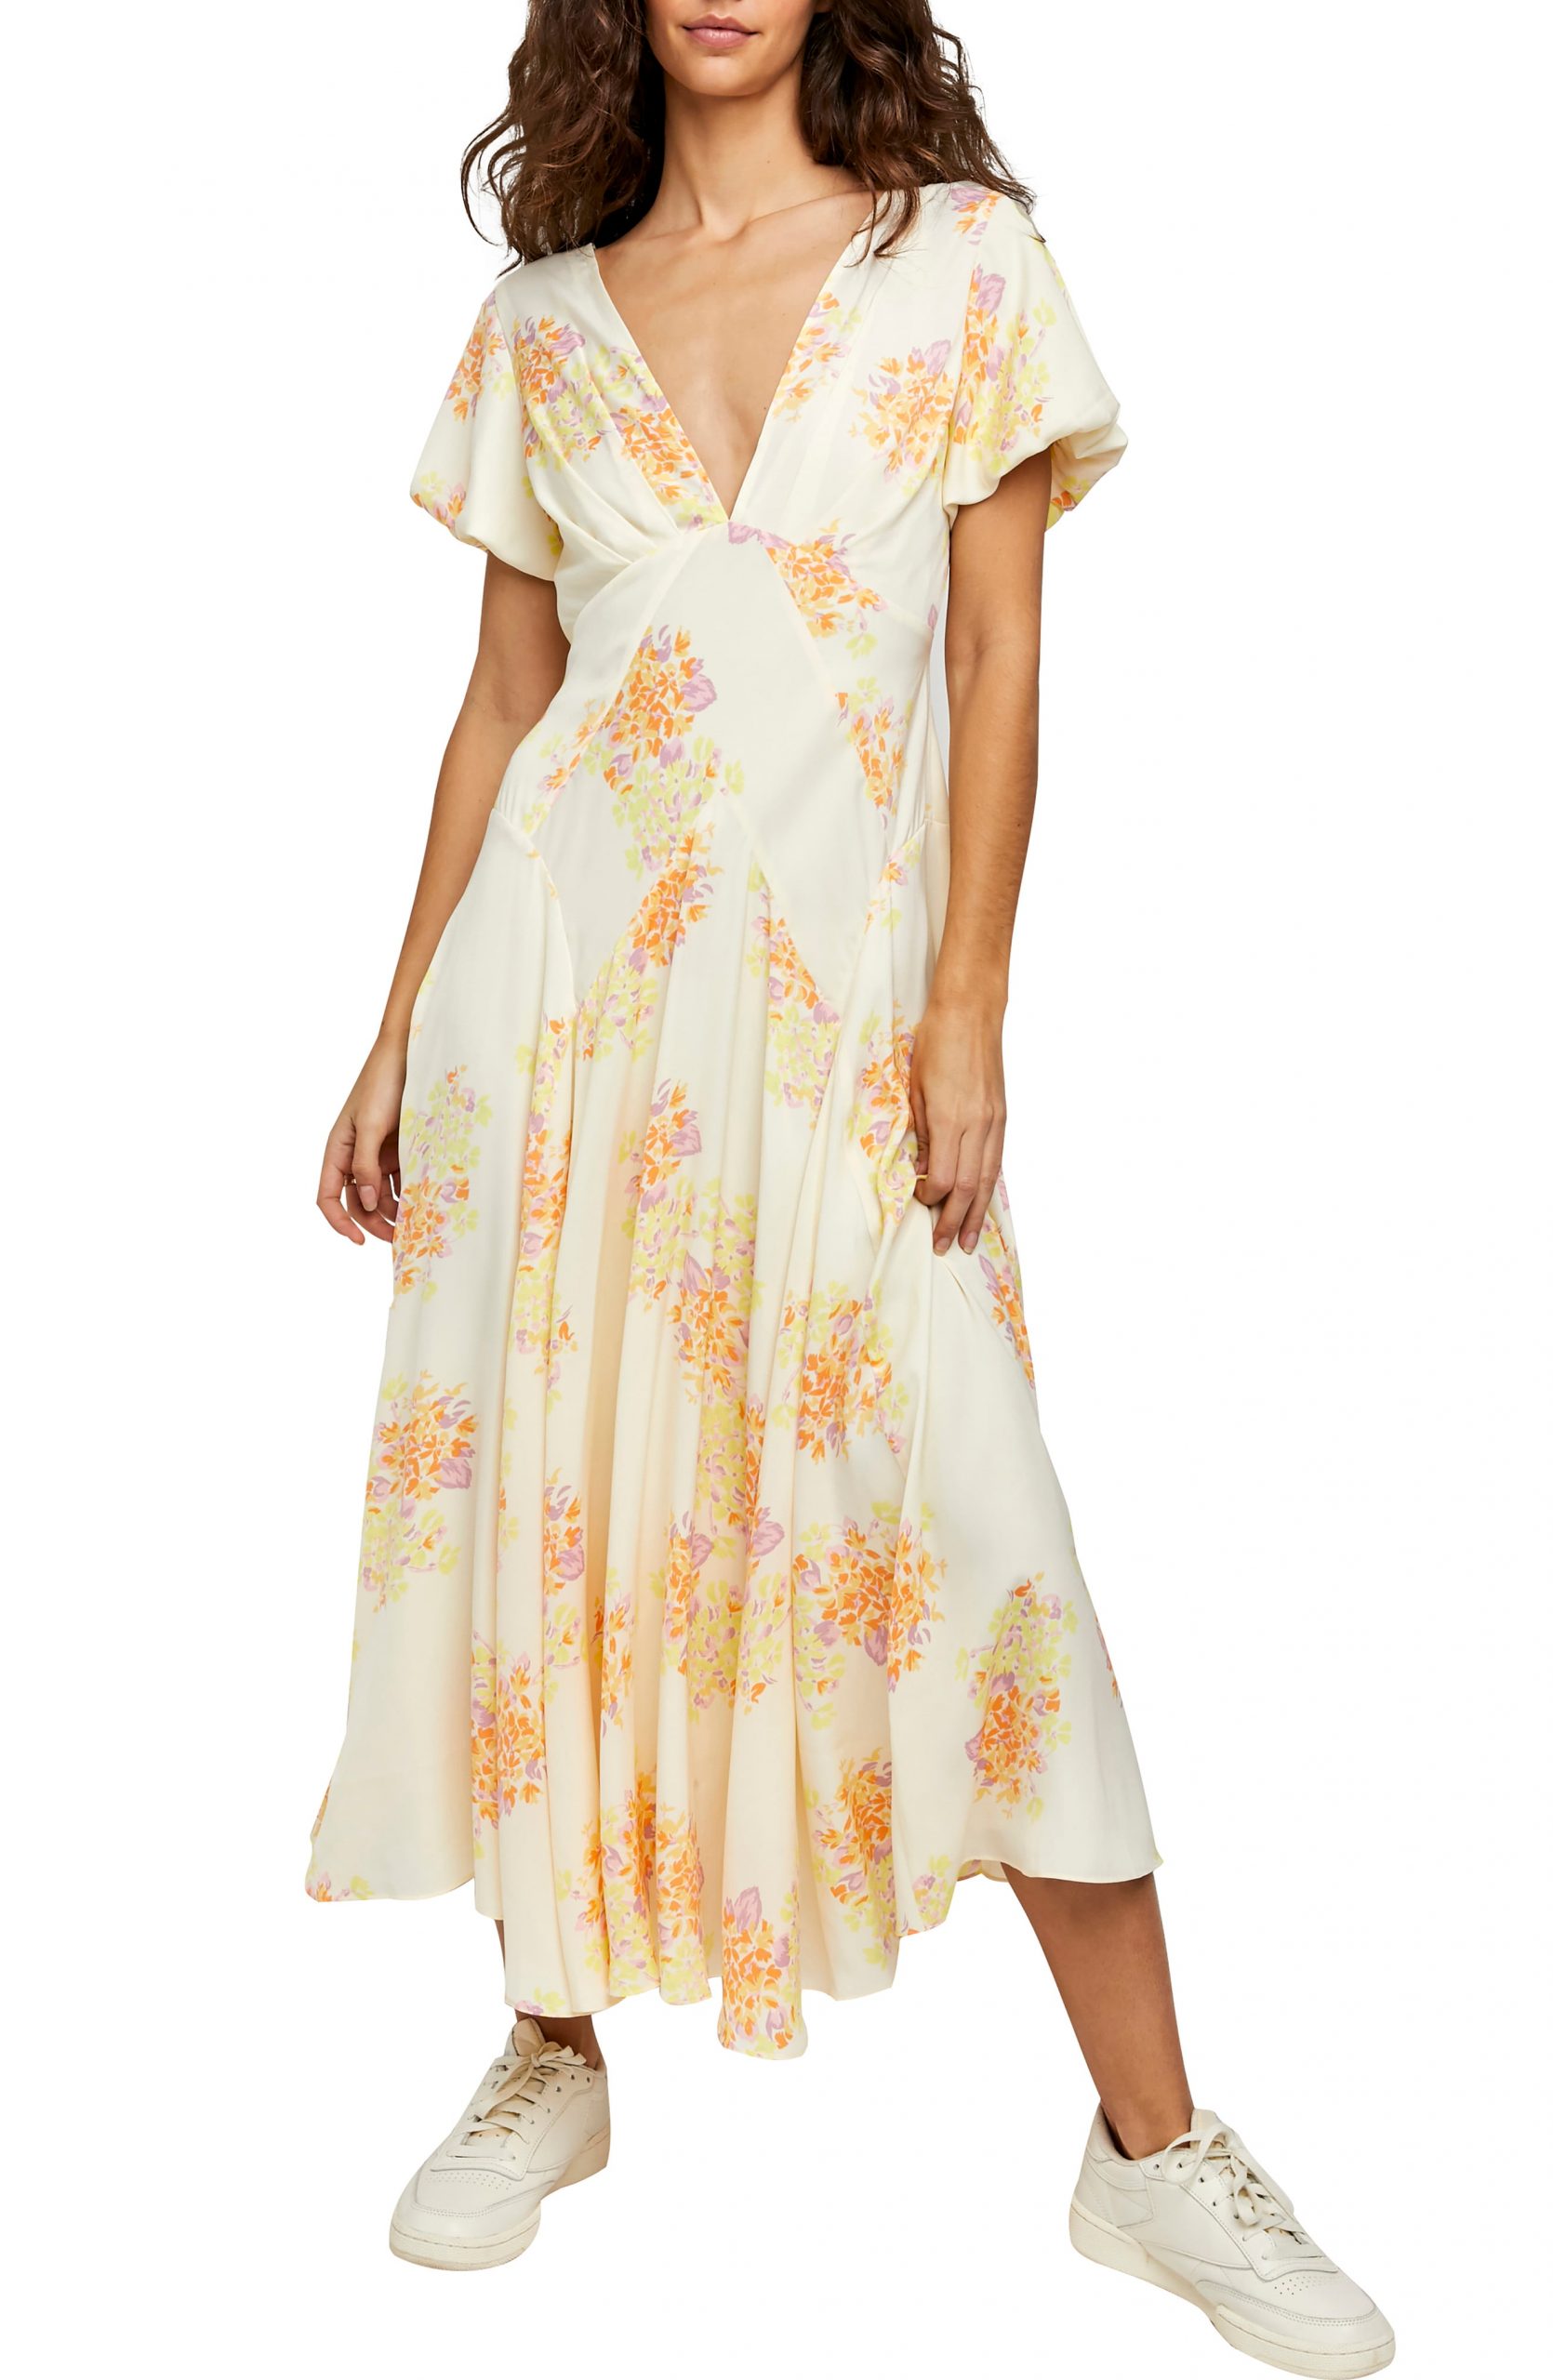 Women’s Free People Laura Floral Maxi Dress, Size X-Small - White ...